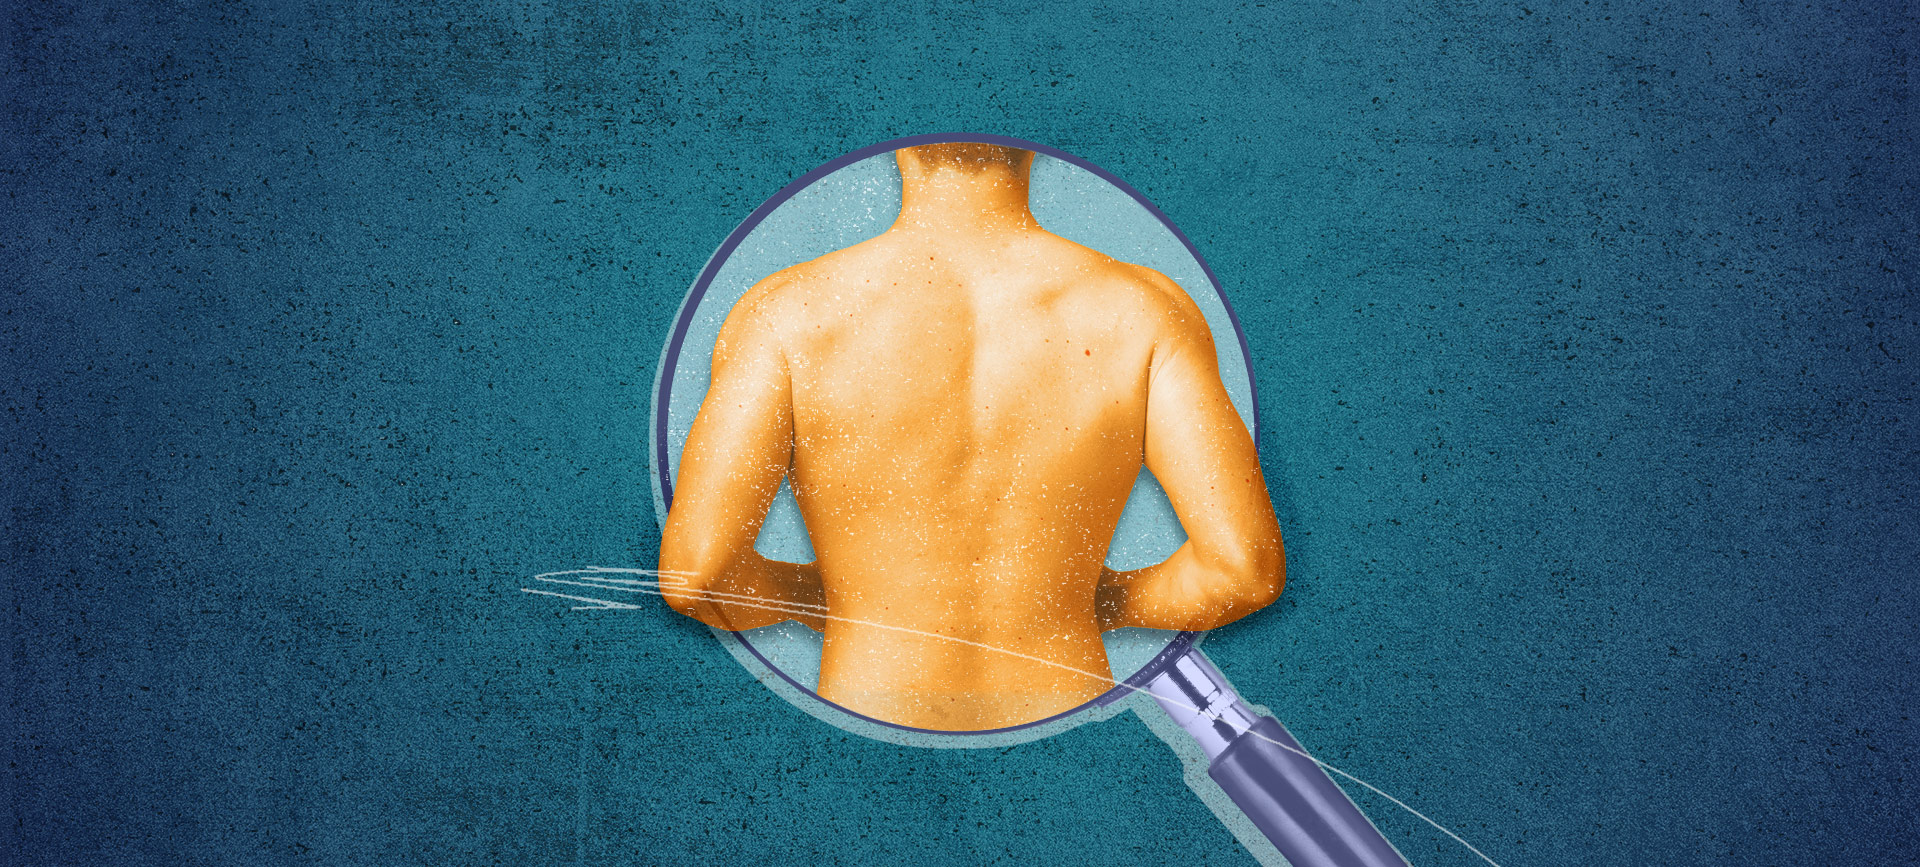 bare man's back in magnifying glass on dark blue background